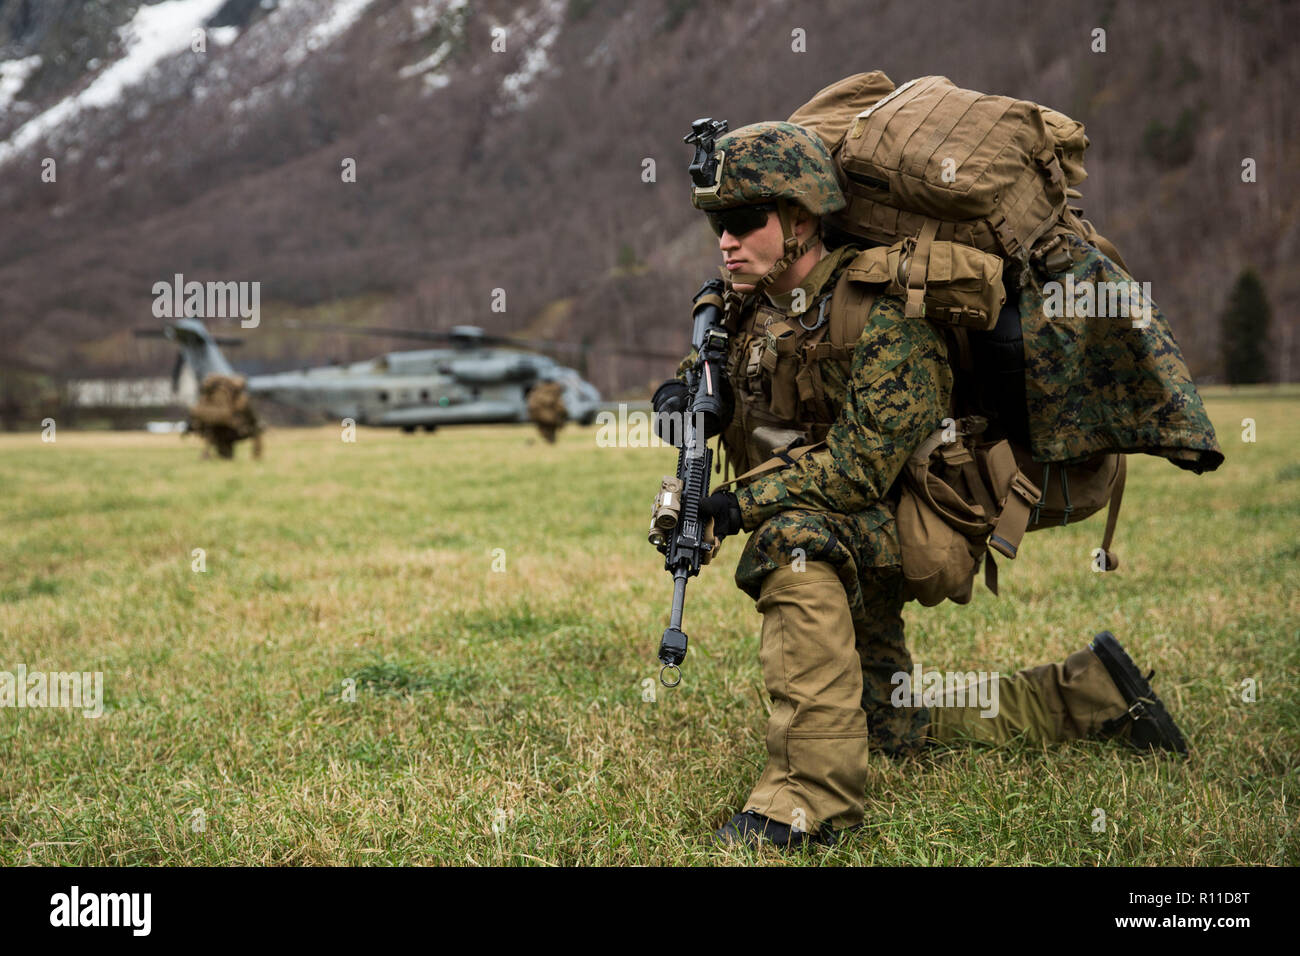 A U.S. Marine Corps holds a position after disembarking a CH-53E Super Stallion helicopter during Exercise Trident Juncture 18 October 31, 2018 in Gjora, Norway. The multi-national exercise is the largest NATO exercise since 2015, and includes more than 50,000 military members from 31 countries. Stock Photo